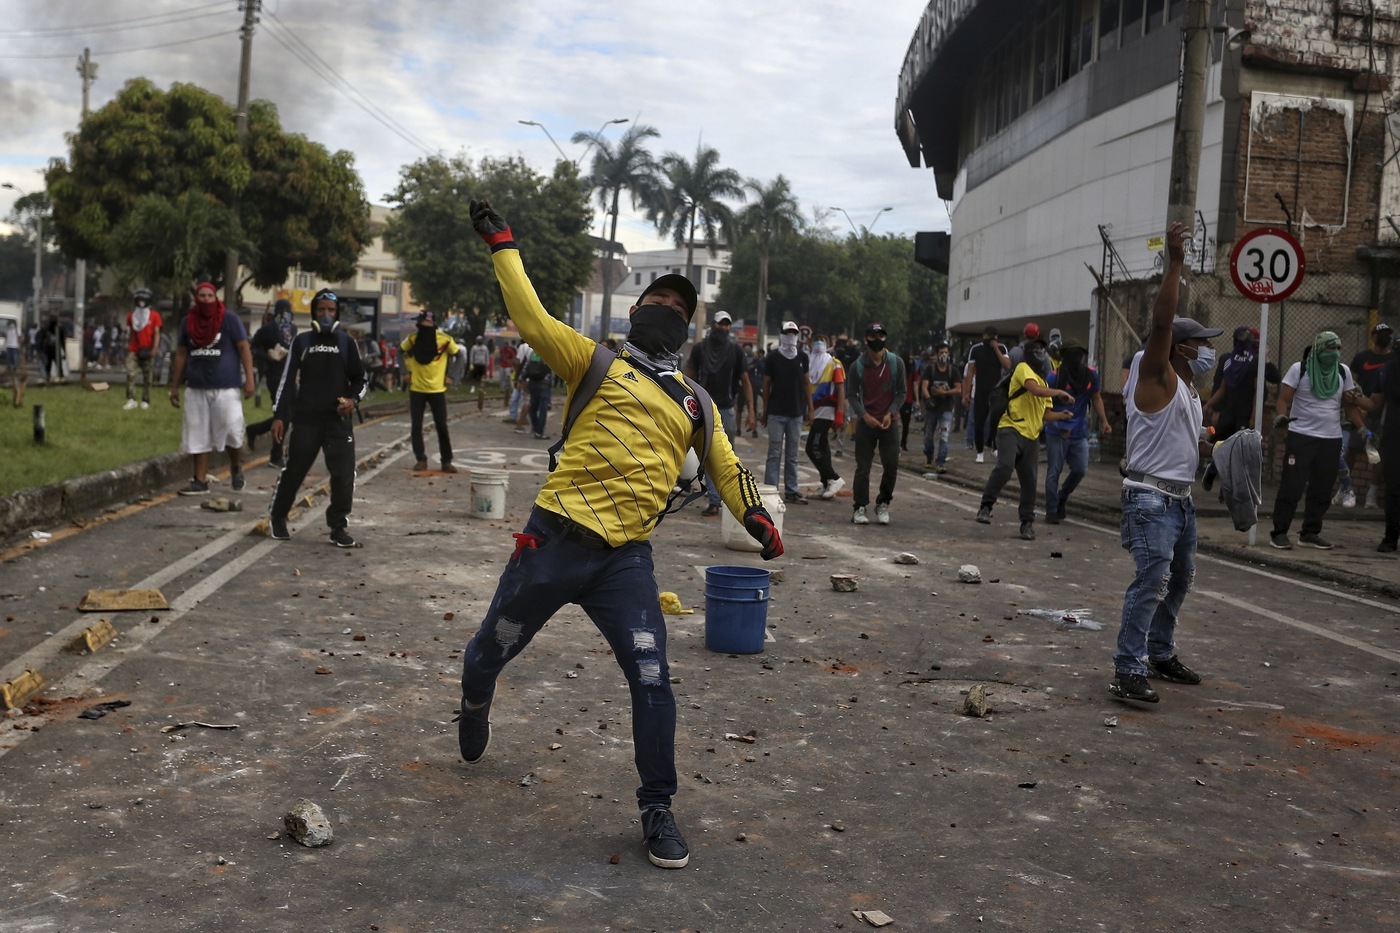 Protesters clash with police during a national strike against tax reform in Cali, Colombia, Monday, May 3, 2021. Colombia's President Ivan Duque withdrew the government-proposed tax reform on Sunday. (AP Photo/Andres Gonzalez)